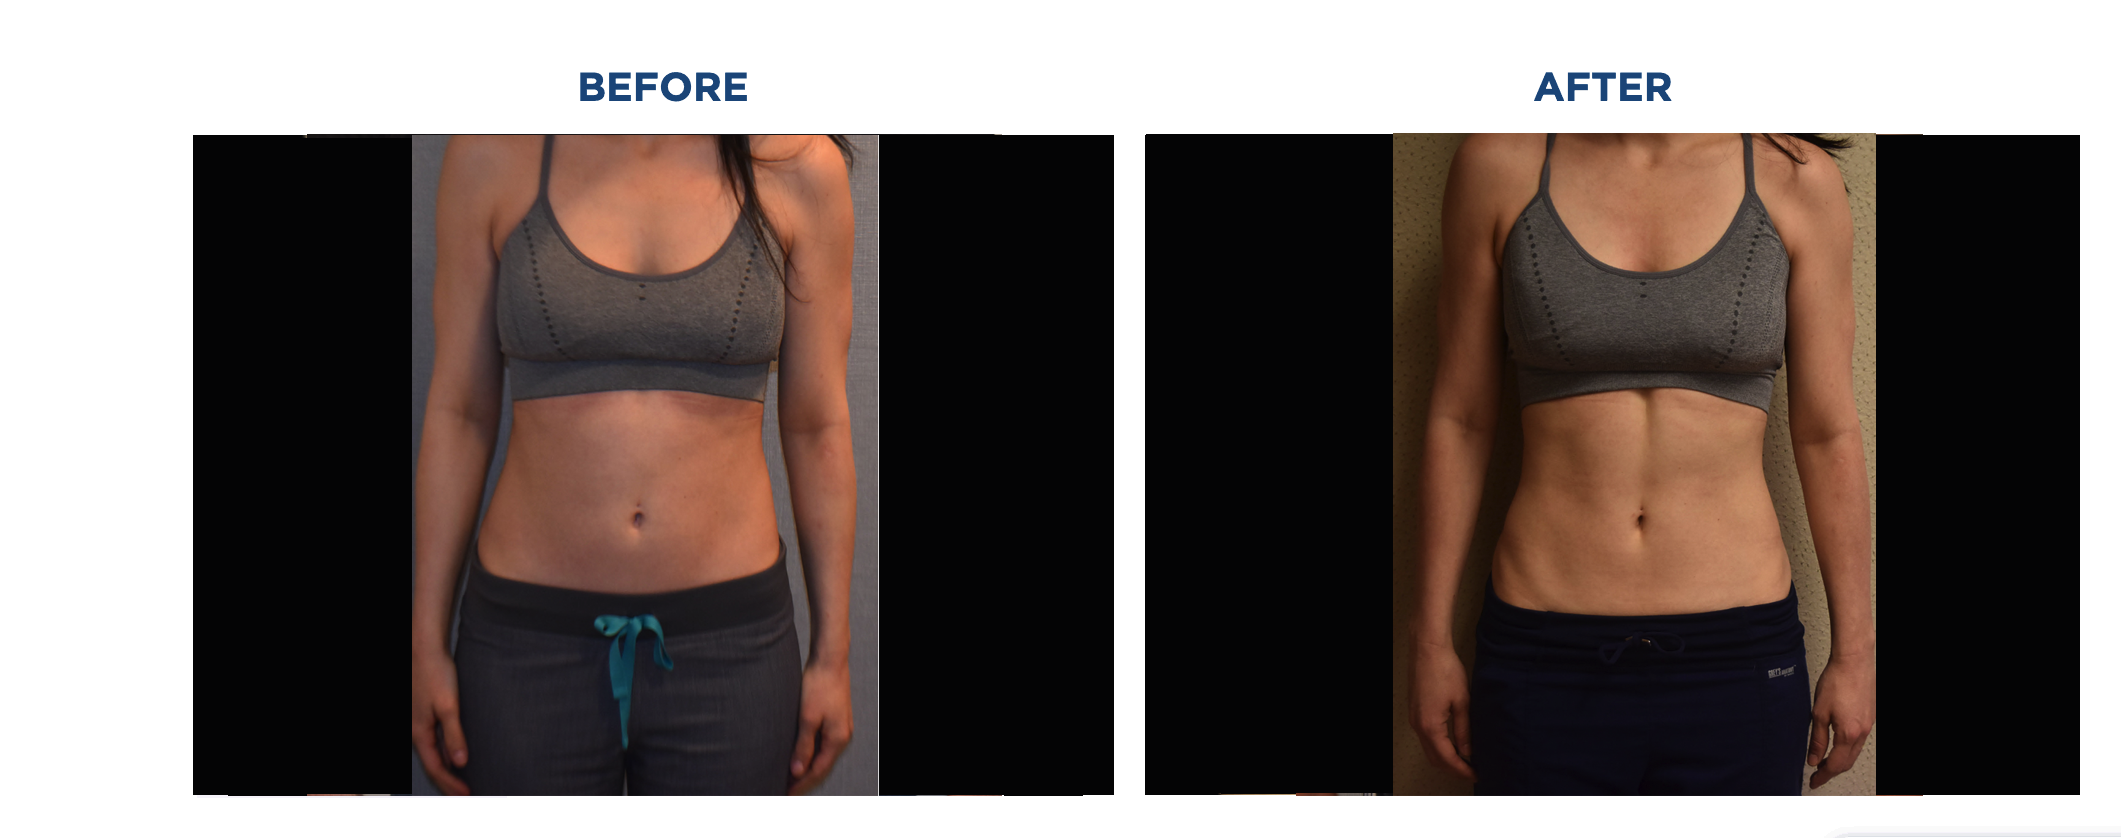 A woman's stomach before and after Emsculpt Neo treatment for liposuction.